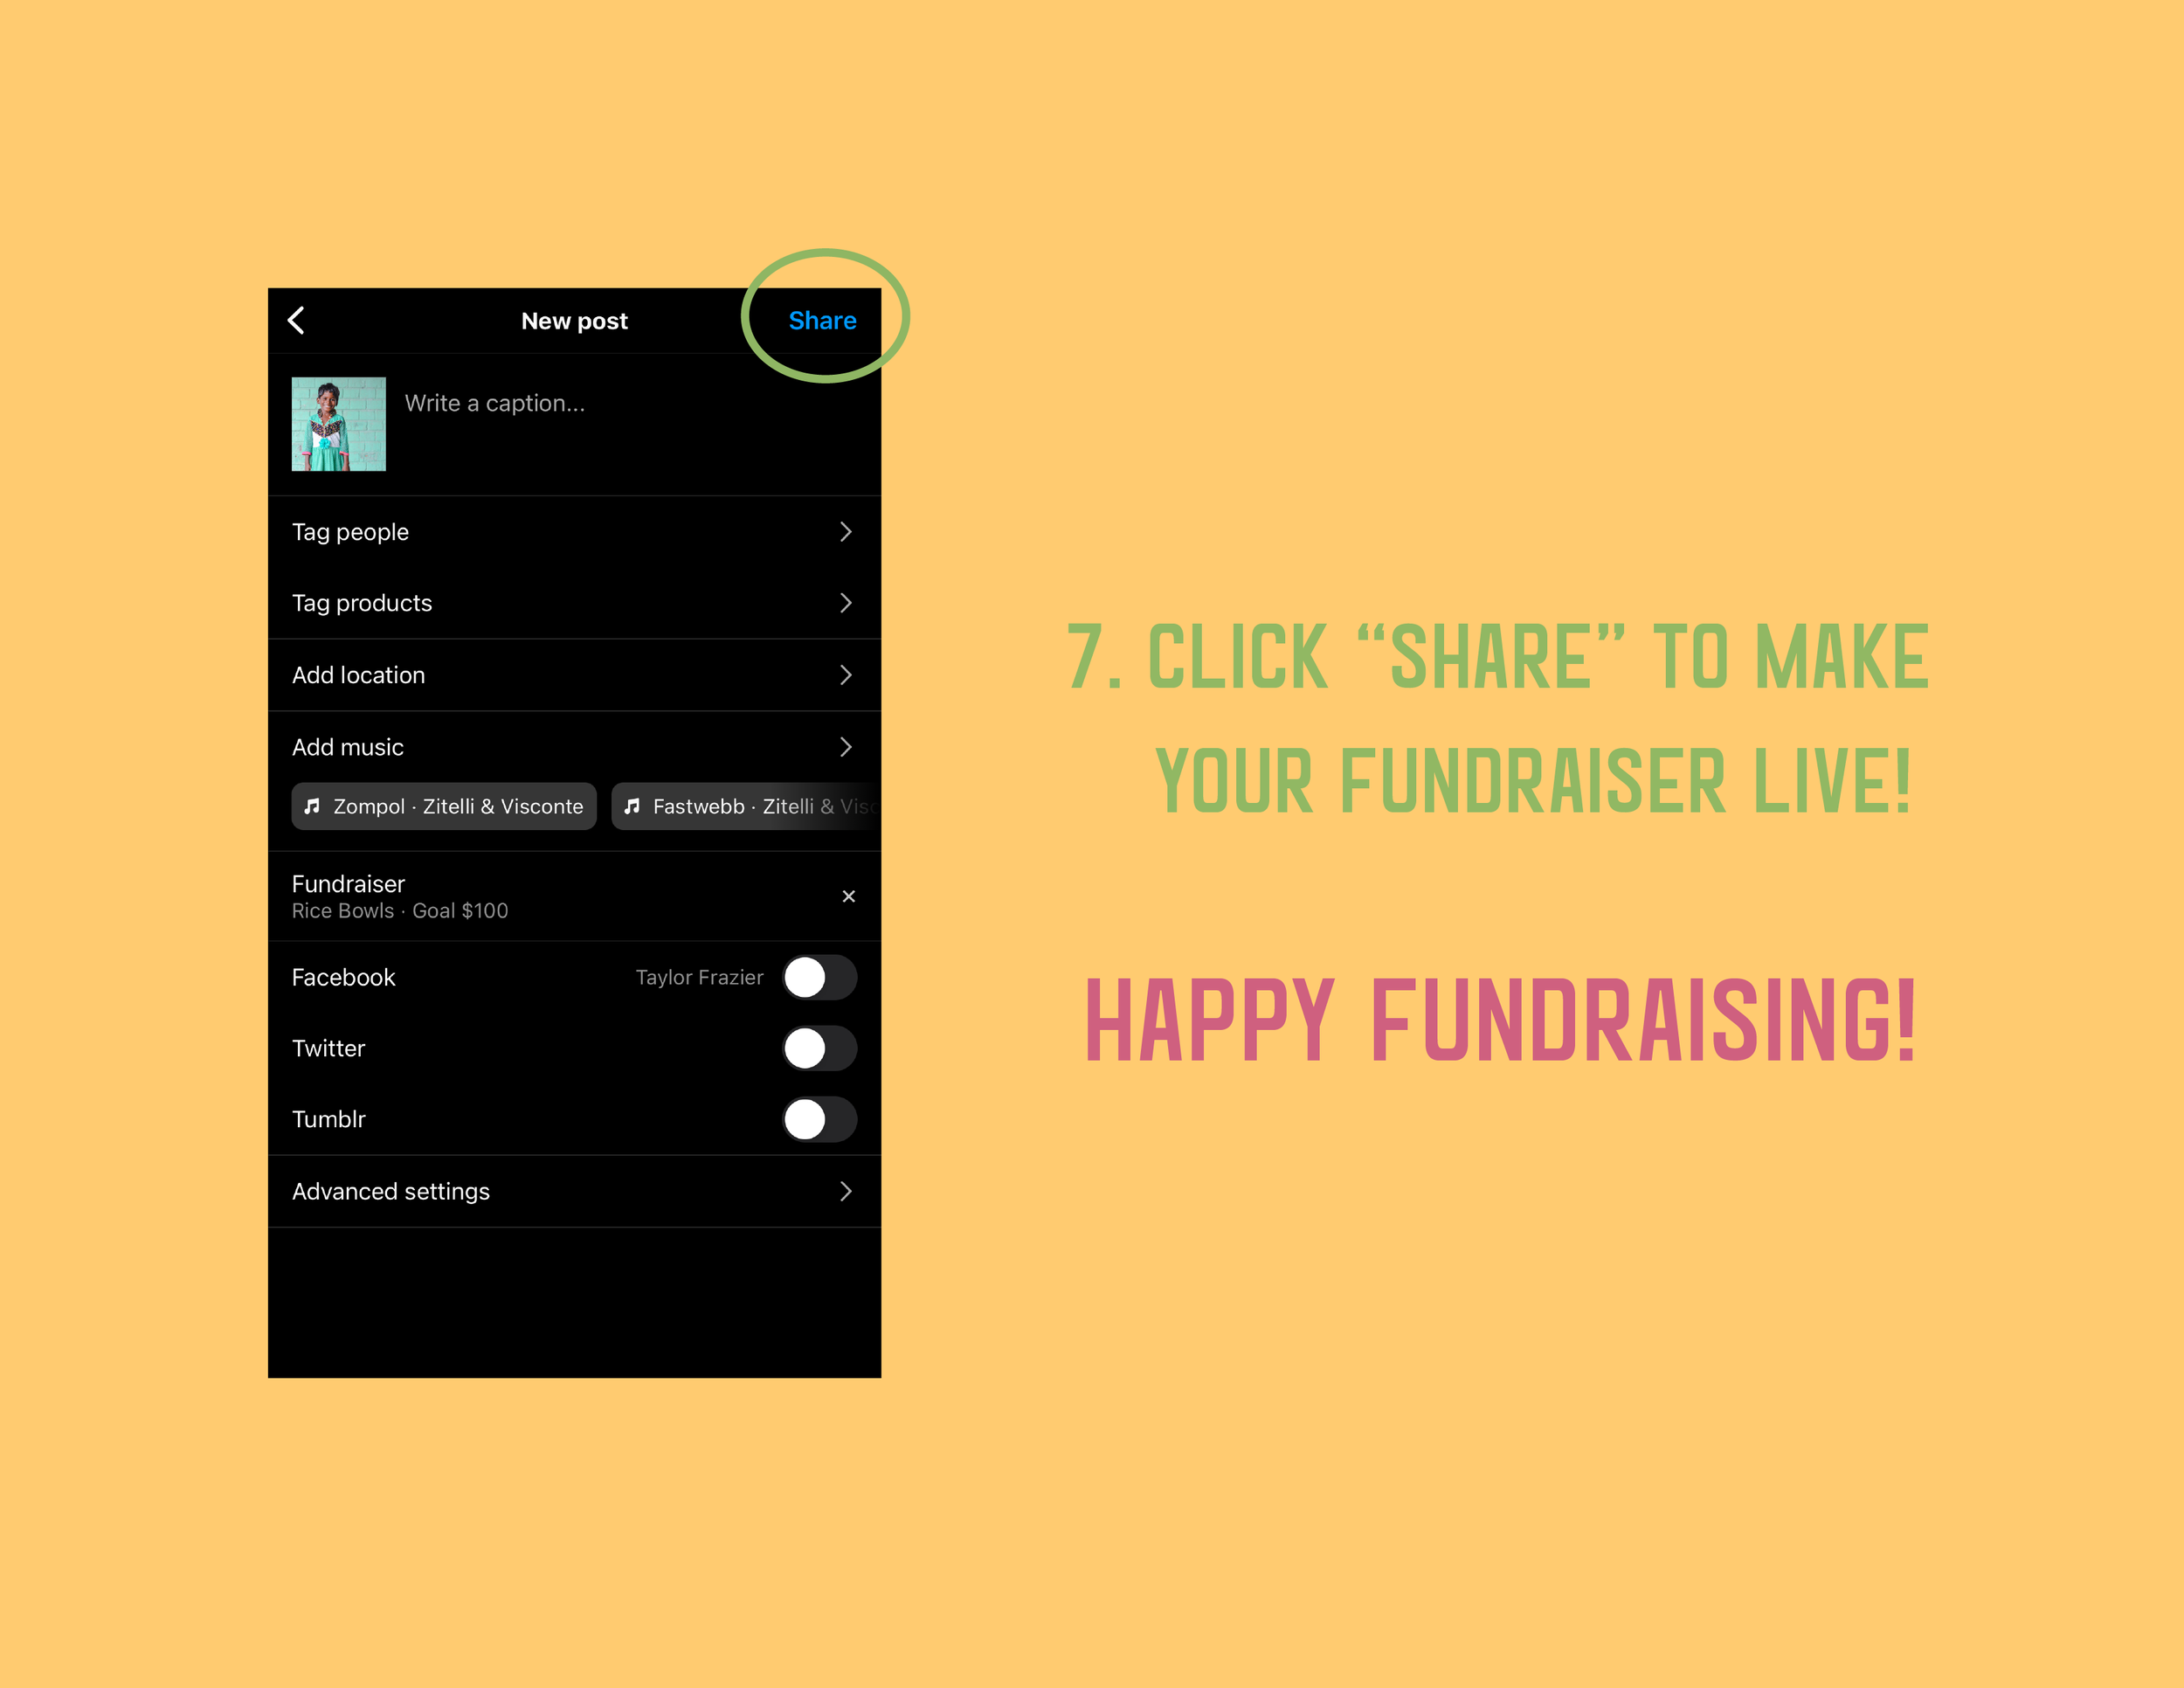 ig-fundraiser-guide-05.png